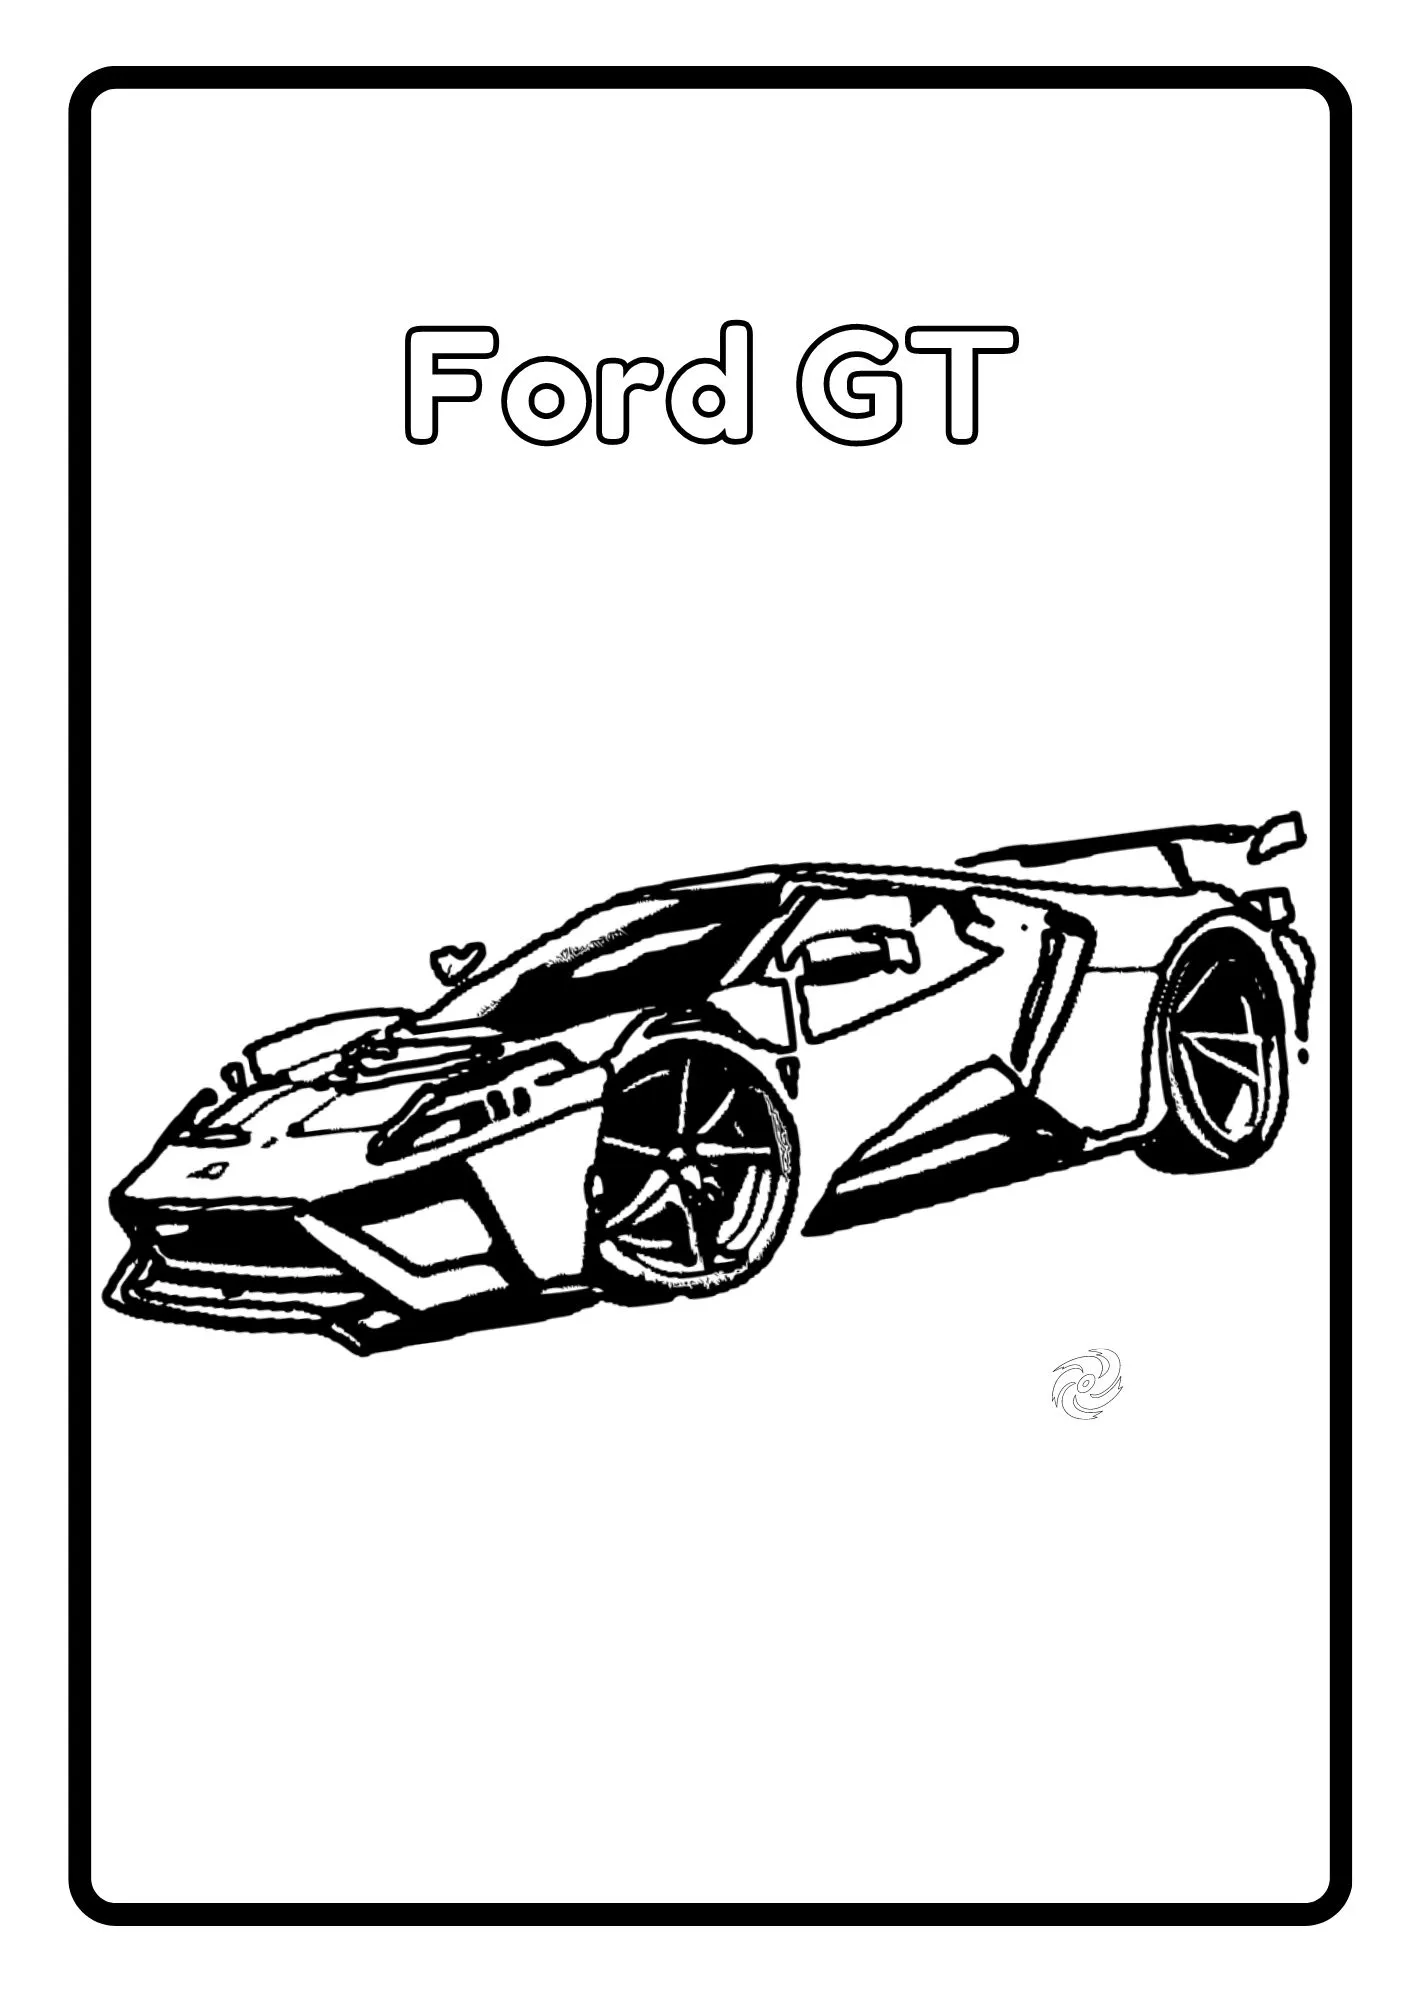 Ford GT Mustang Coloring Page